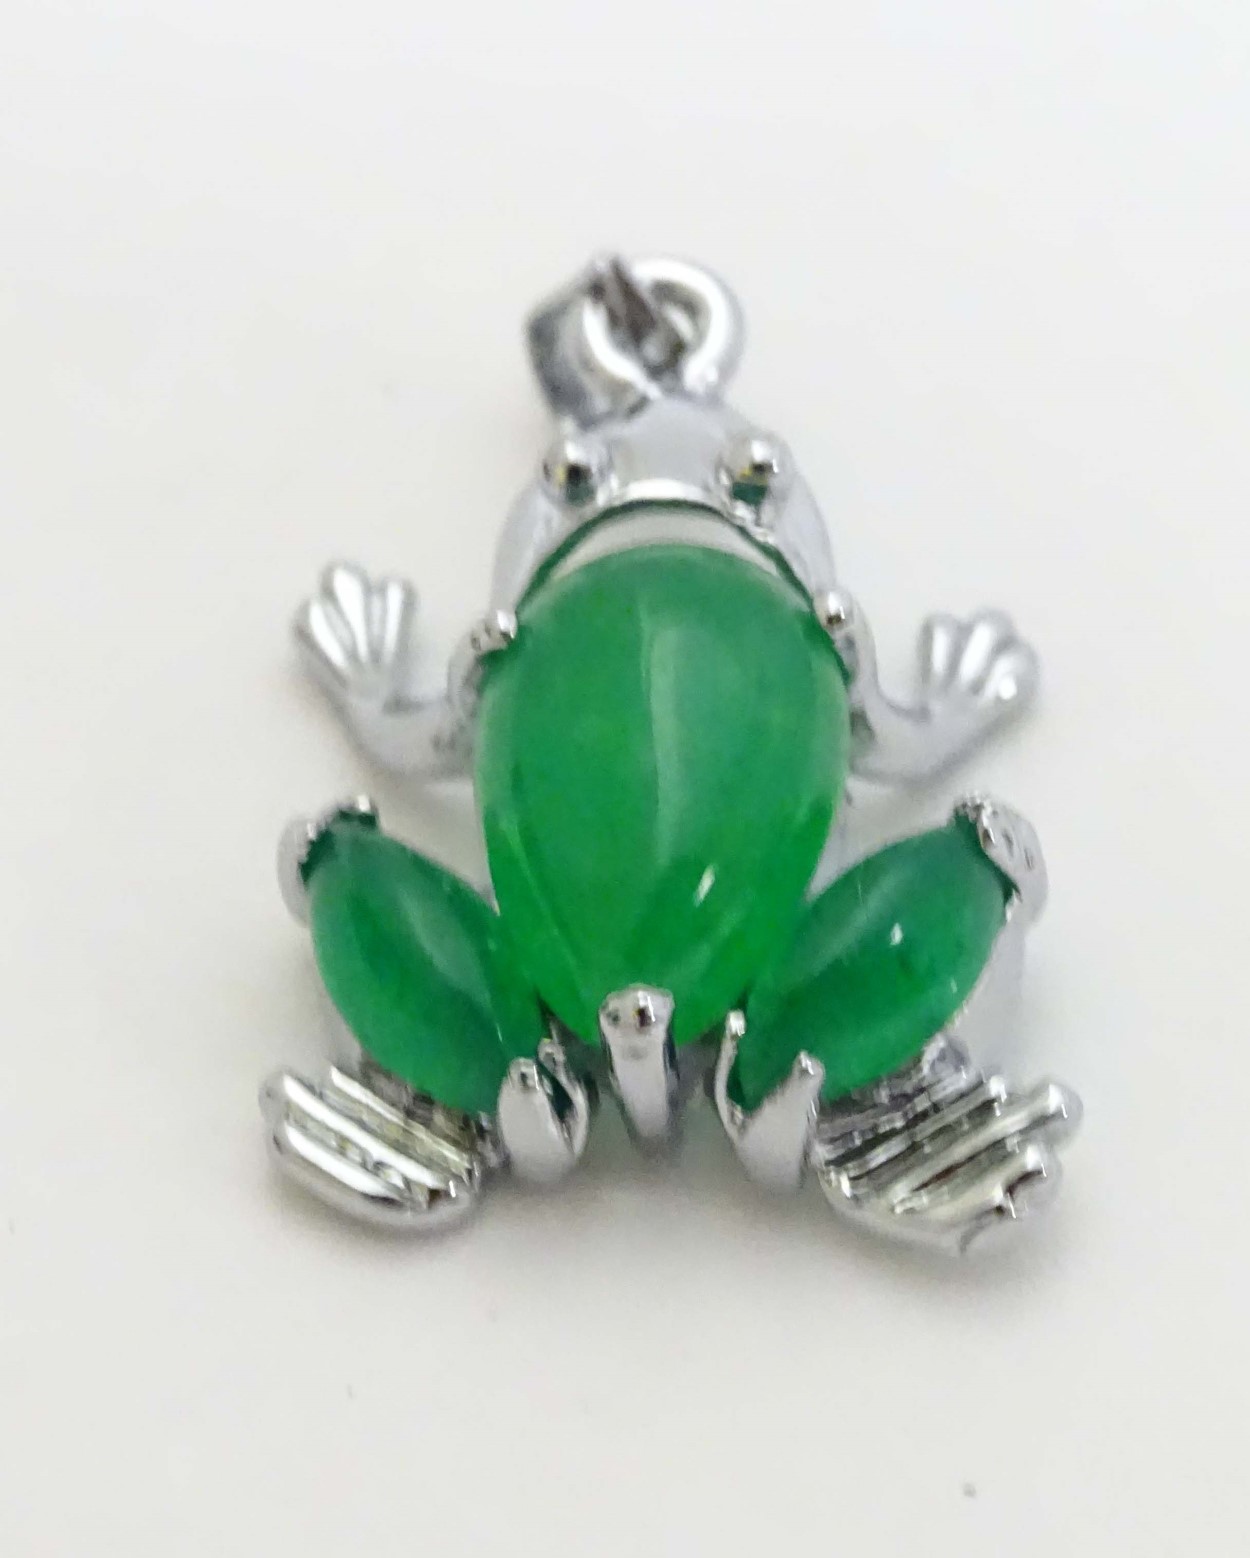 A white metal pendant formed as a frog set with green jade like cabochon 1" long - Image 4 of 6